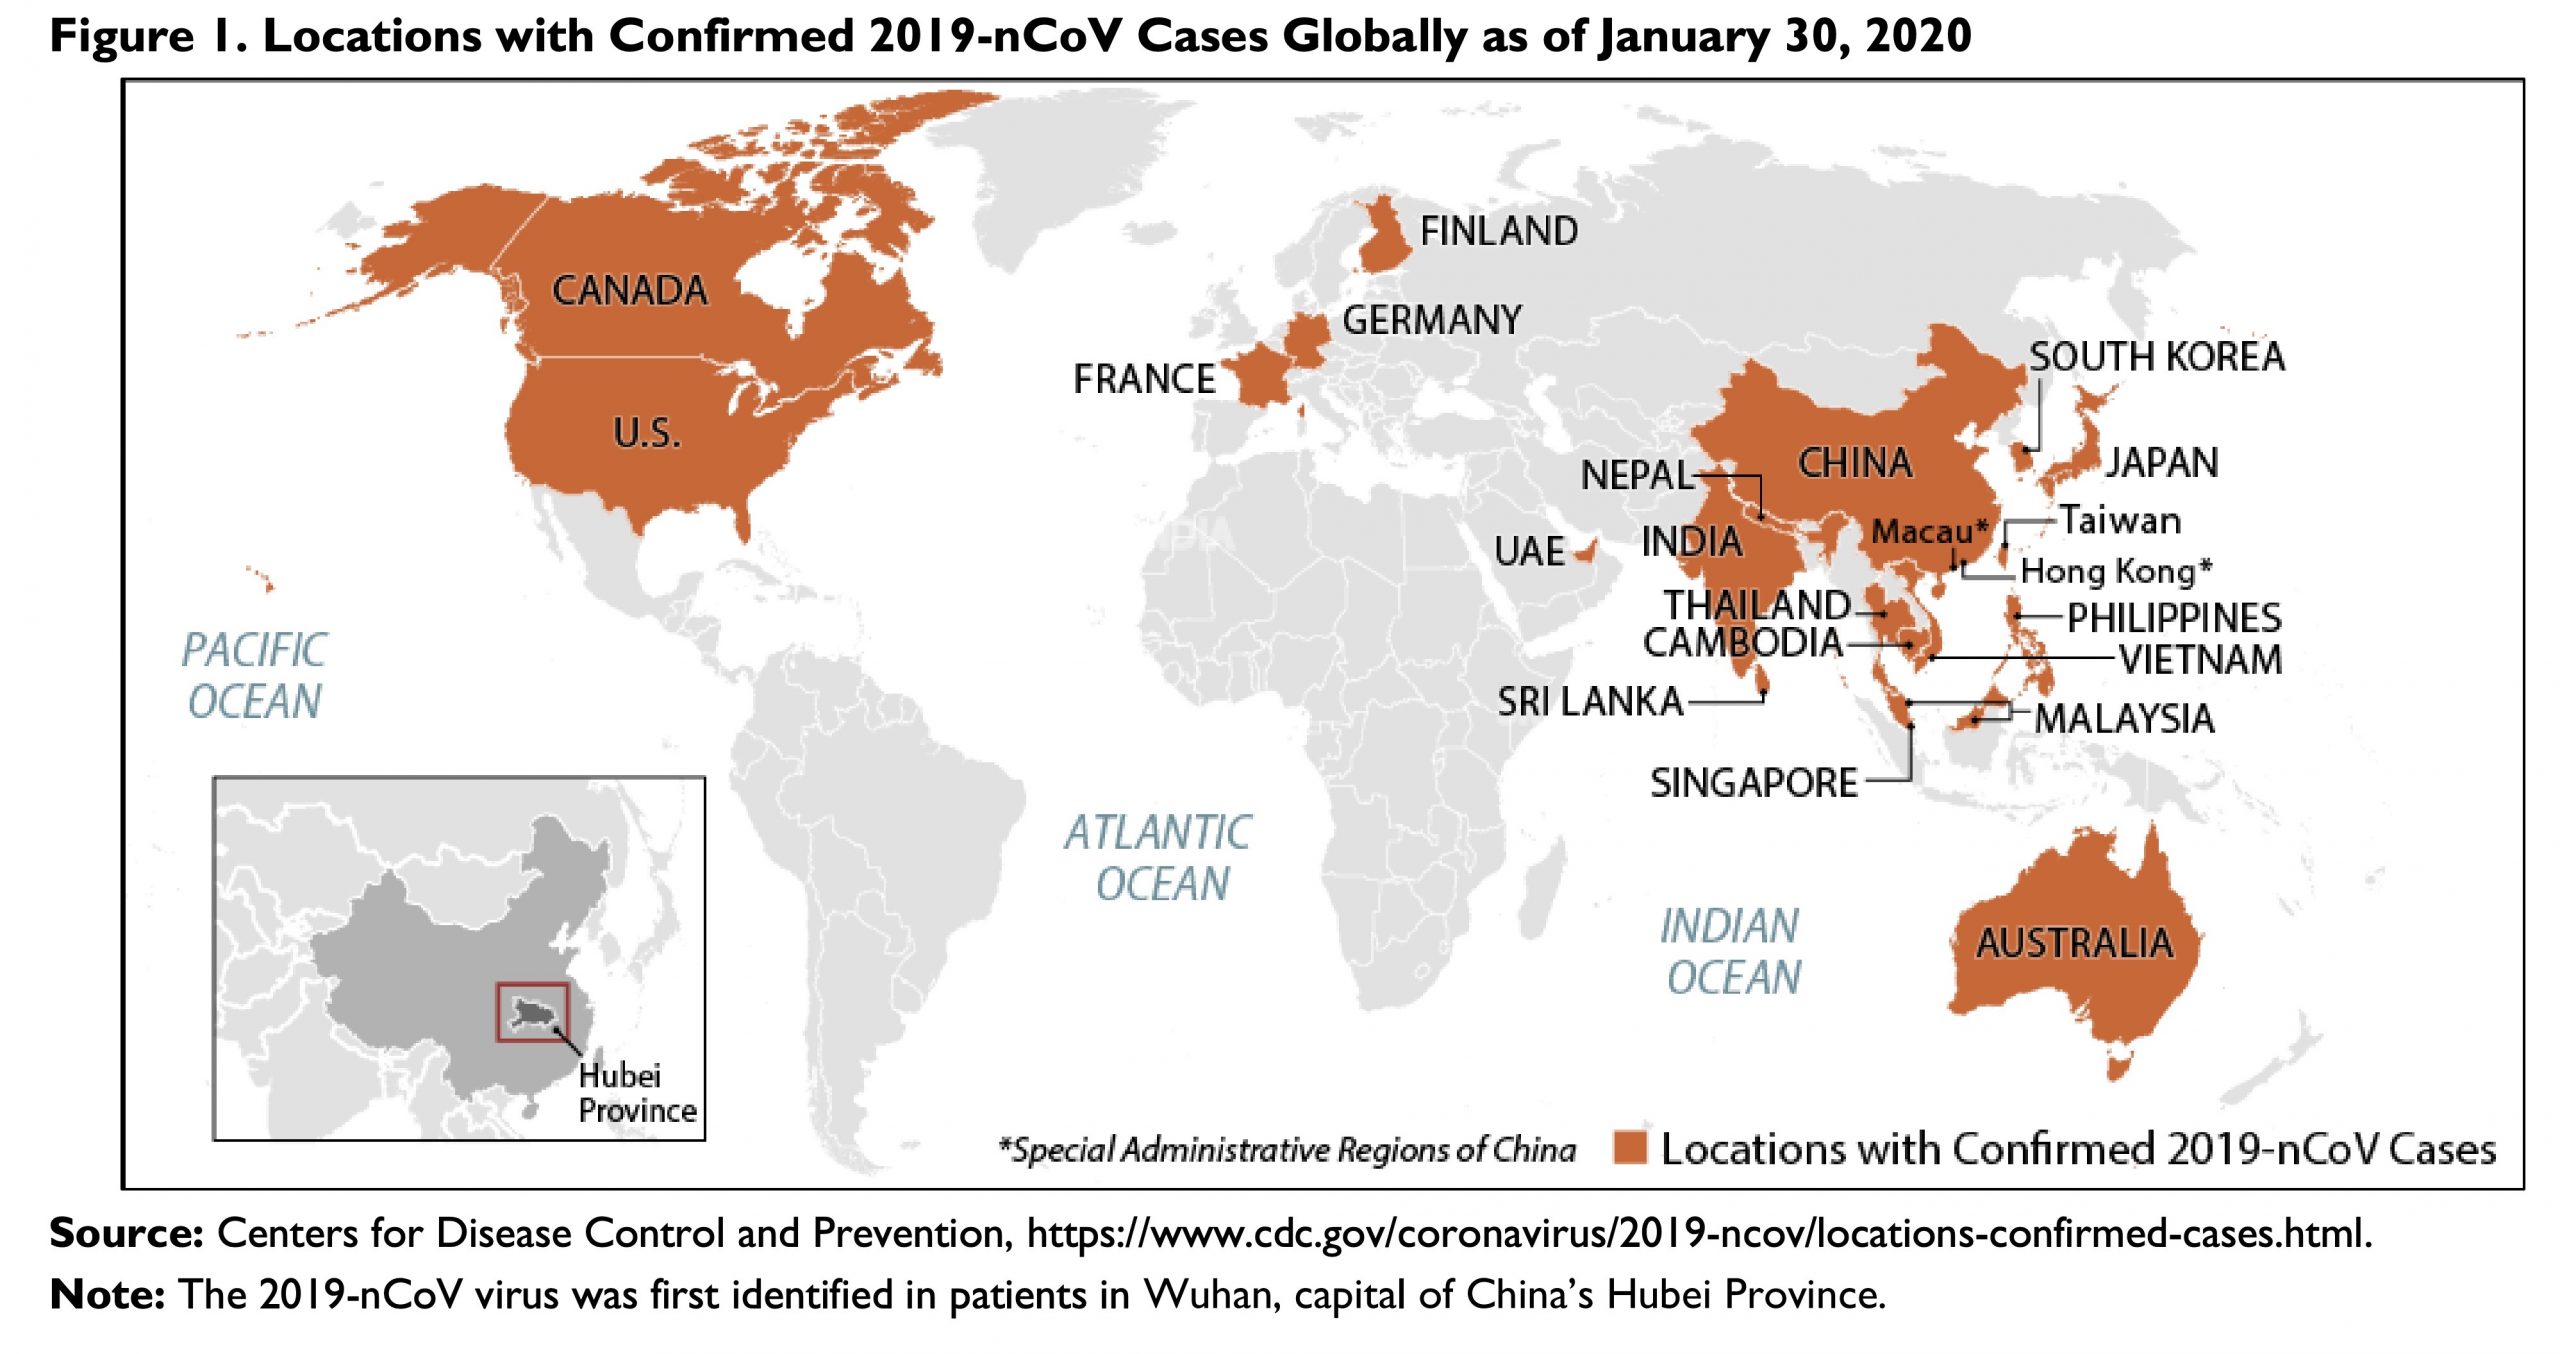 Locations with Confirmed 2019-nCoV Cases Globally